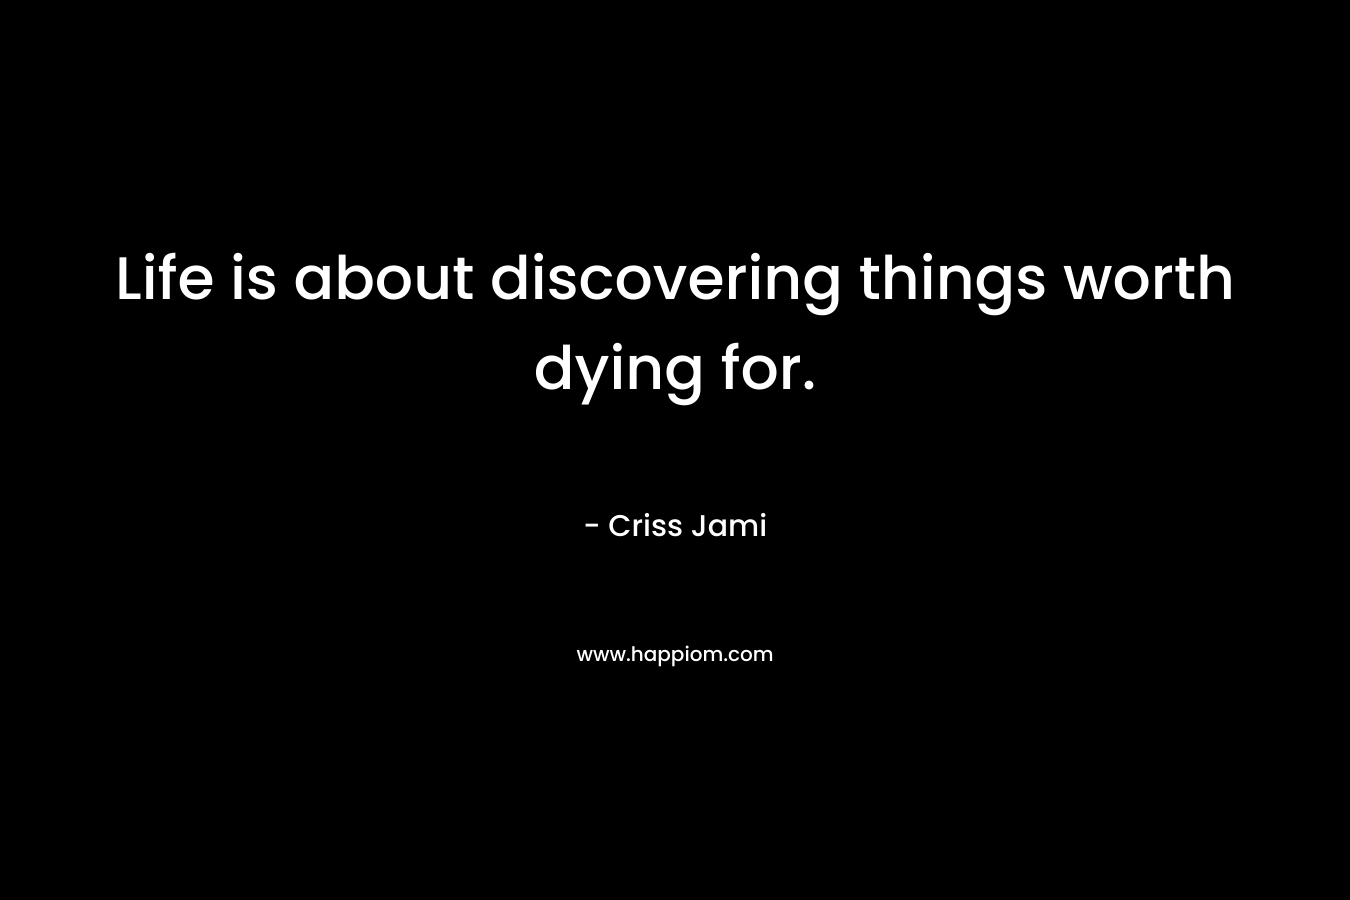 Life is about discovering things worth dying for.